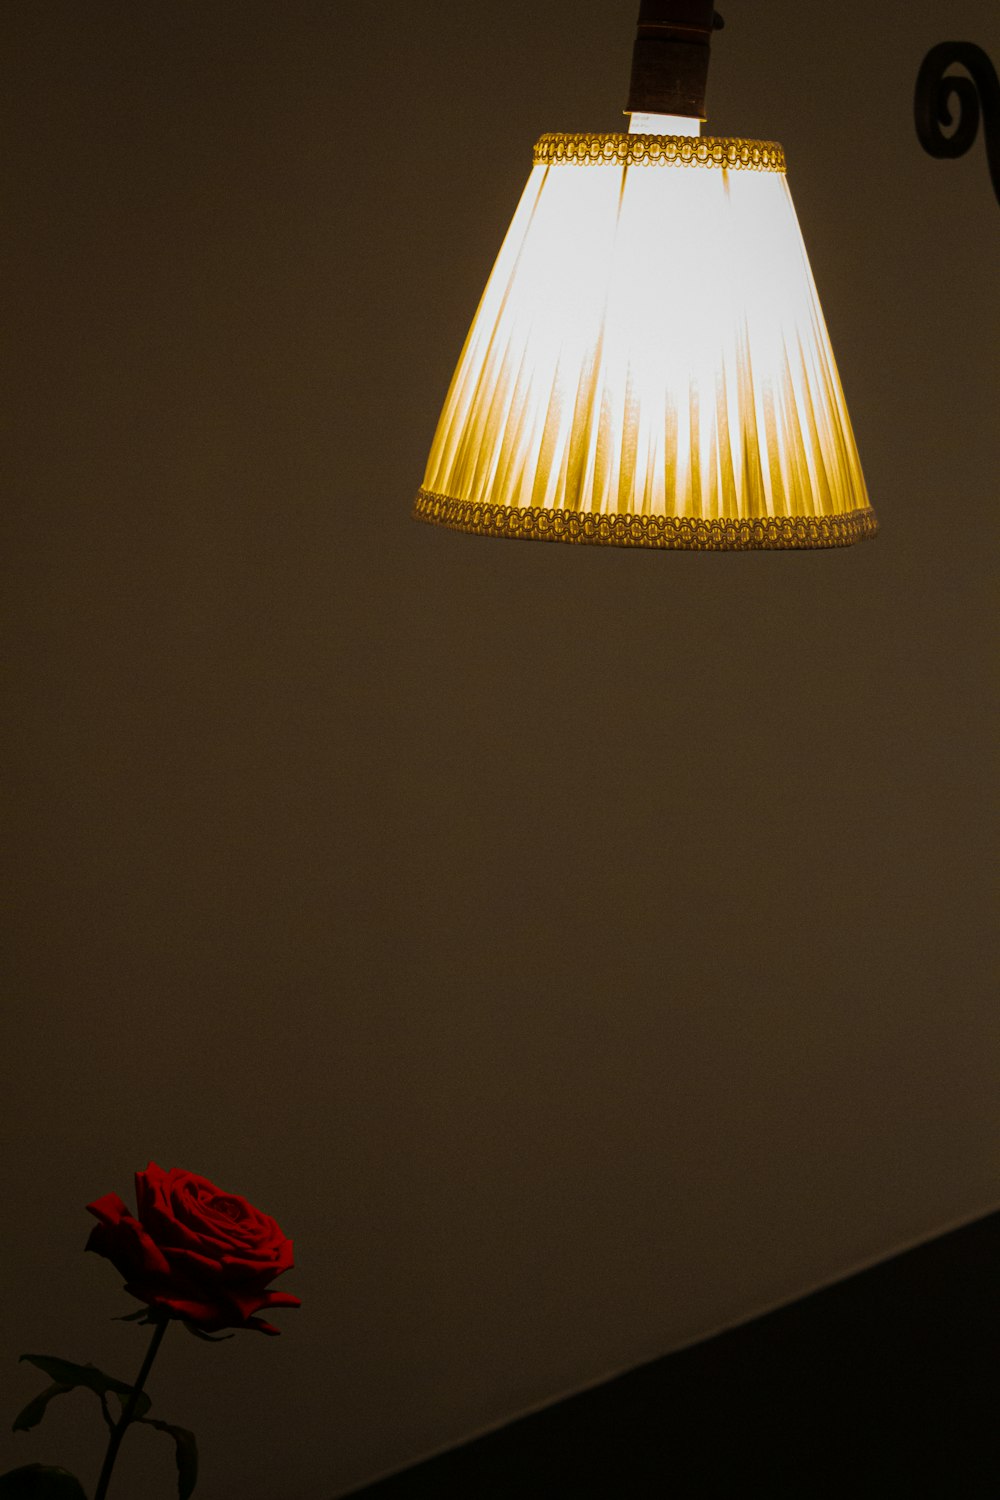 a lamp that is next to a red rose